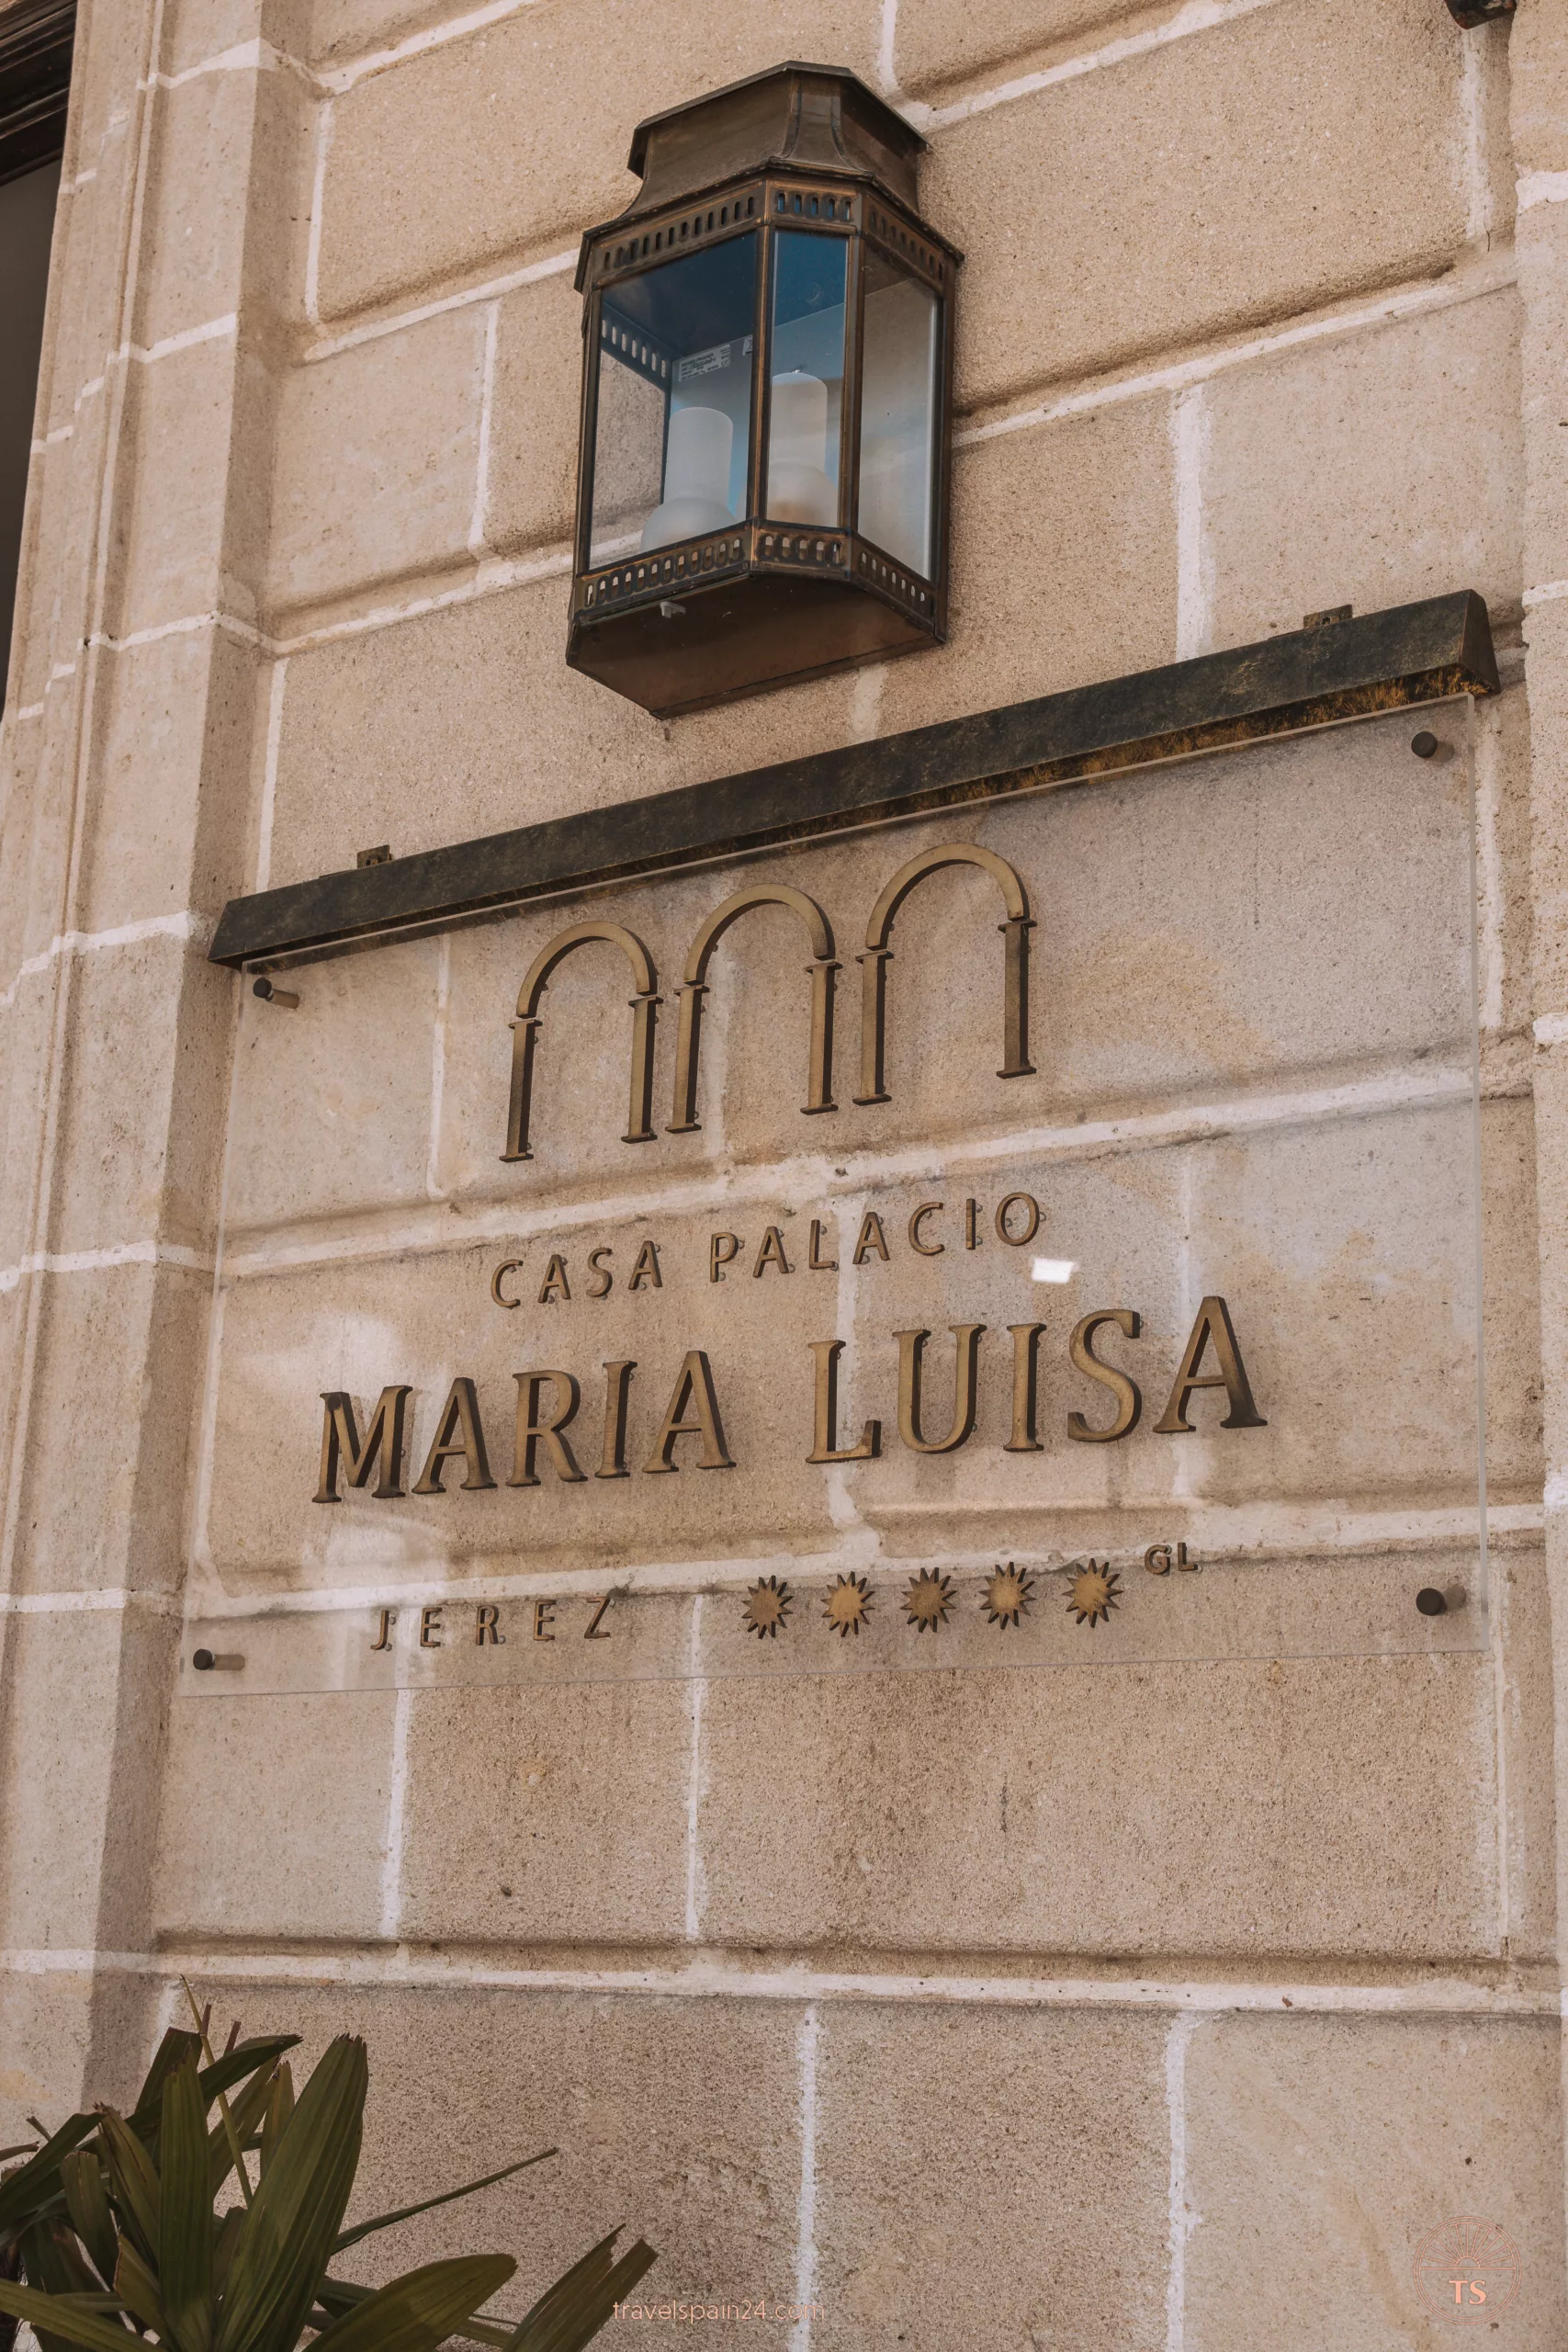 Close-up of the hotel sign for Casa Palacio María Luisa in Jerez de la Frontera, highlighting the elegant lettering. This image relates to the post by showcasing a recommended place to stay in Jerez de la Frontera.